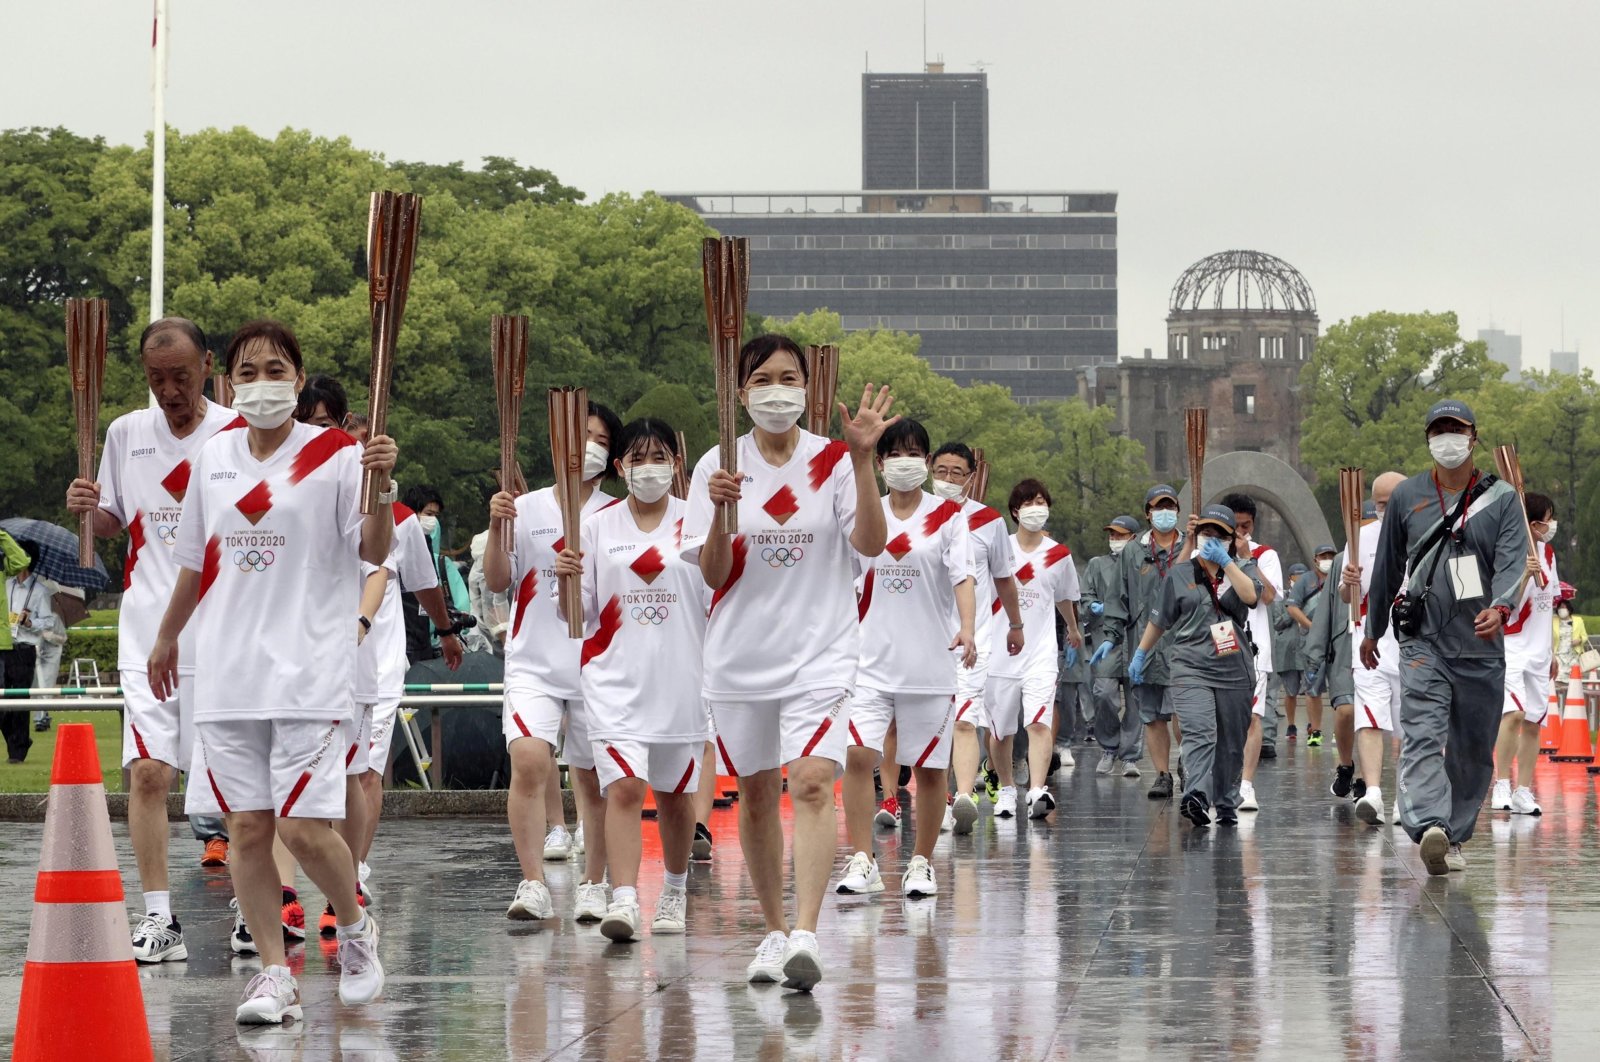 Tokyo 2020 Olympic torch relay participants pass the Atomic Bomb Dome in the background during the event without spectators due to the COVID-19 outbreak, at Peace Memorial Park in Hiroshima, Japan May 17, 2021. (Reuters Photo)